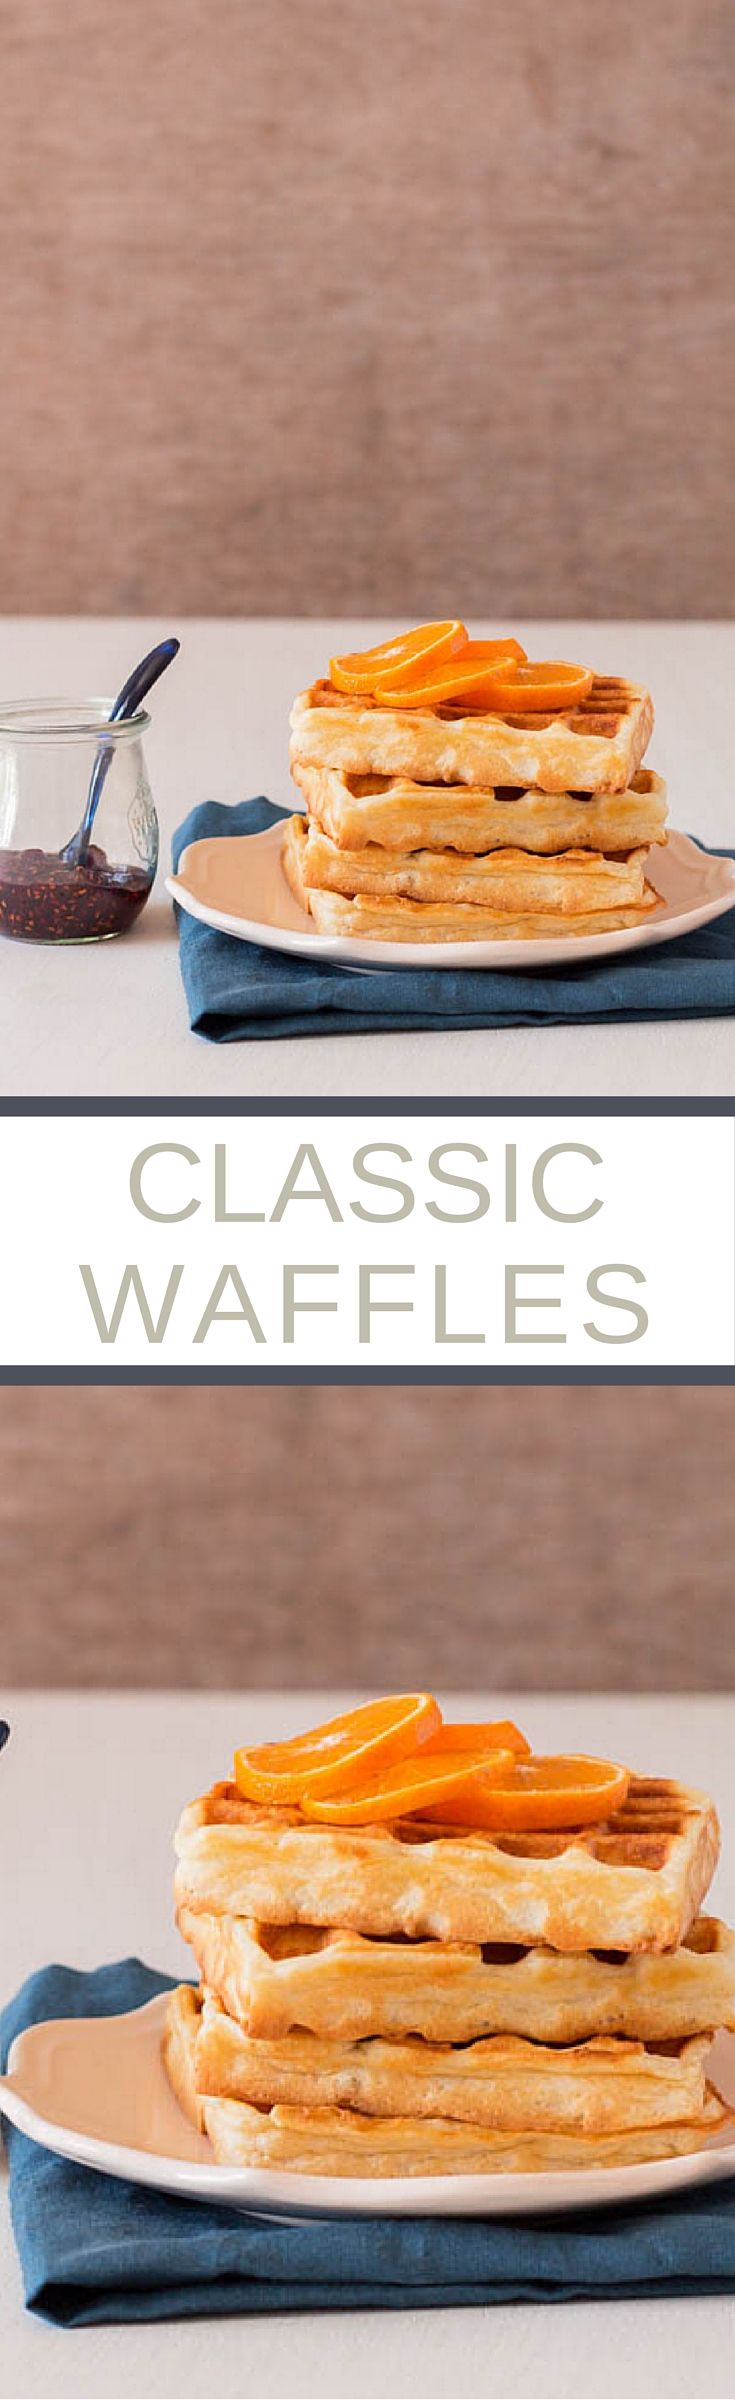 Breville Crazy Waffle Cones Manual Meat